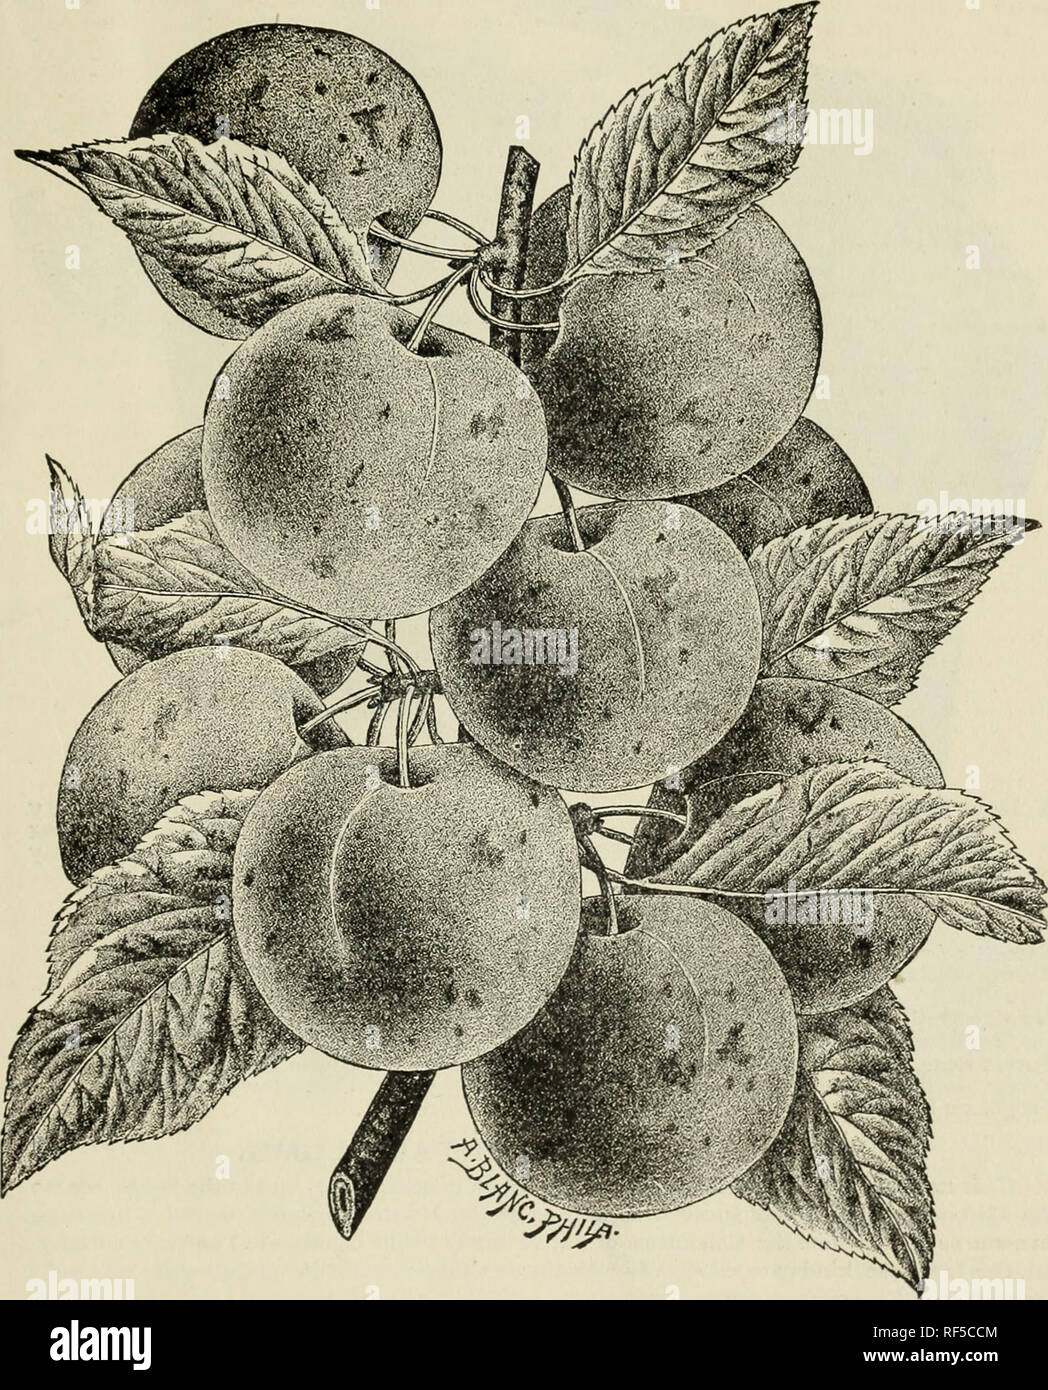 . Descriptive catalogue of fruit and ornamental trees, shrubs, vines and plants. Nursery stock Maryland Baltimore Catalogs; Nursery stock Virginia Richmond Catalogs; Fruit trees Seedlings Catalogs; Fruit Catalogs; Trees Seedlings Catalogs; Shrubs Catalogs; Plants, Ornamental Catalogs. Descriptive Catalogue. 45. Wild Goose Plum. Washington. (Bo/mar's.) Very large ; skin yellowish green, often with a pale red blush ; flesh yellowish, firm, very sweet and luscious, separating freely from the stone. There is perhaps, not another plum that stands so high in general estimation in this country as the Stock Photo